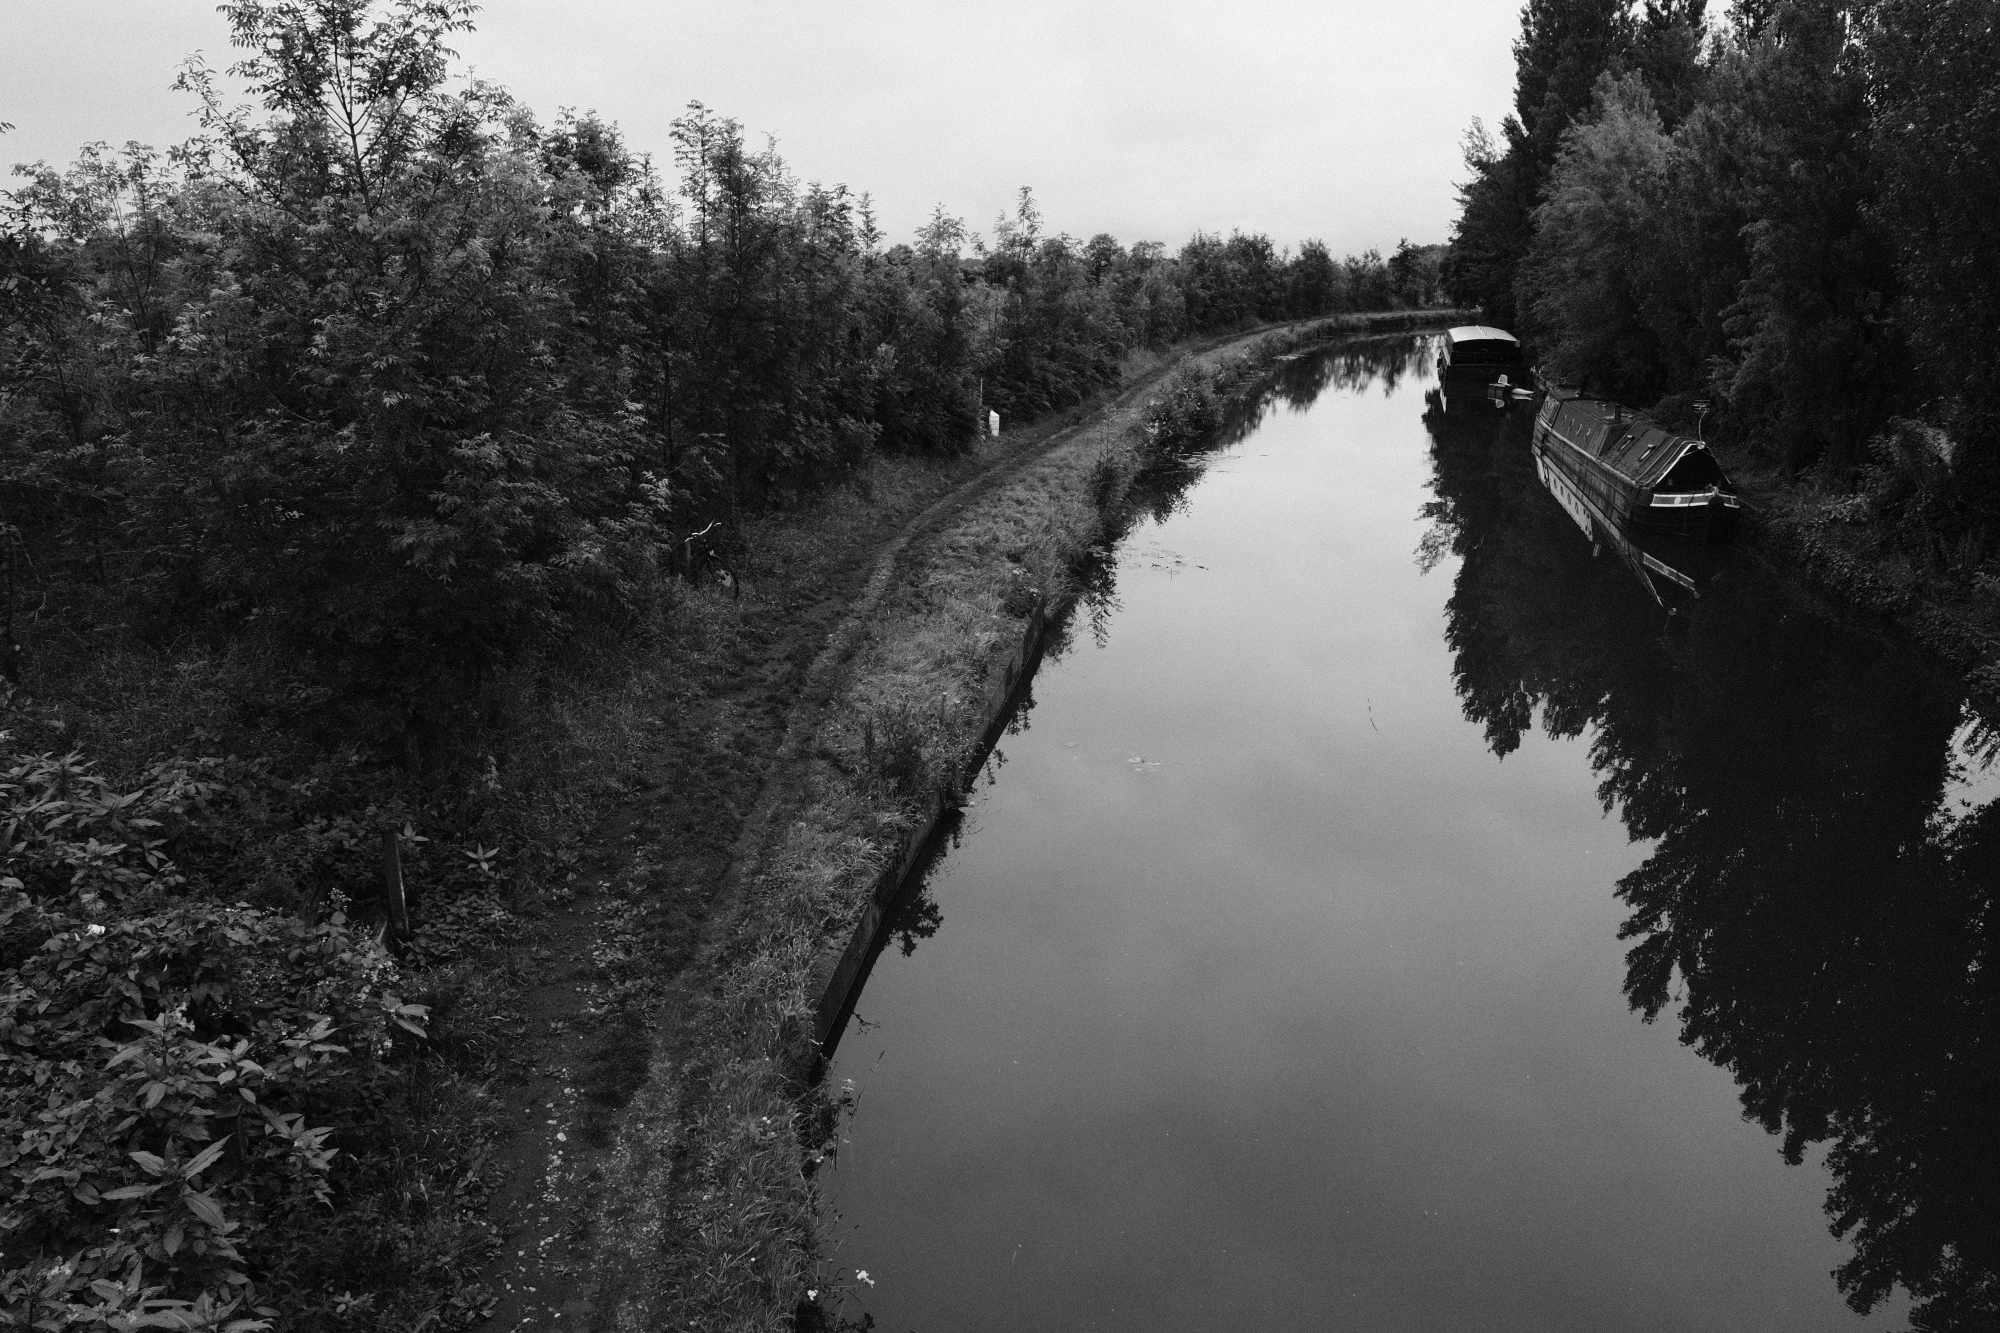 view of the Leeds-Liverpool canal from one of the bridges.